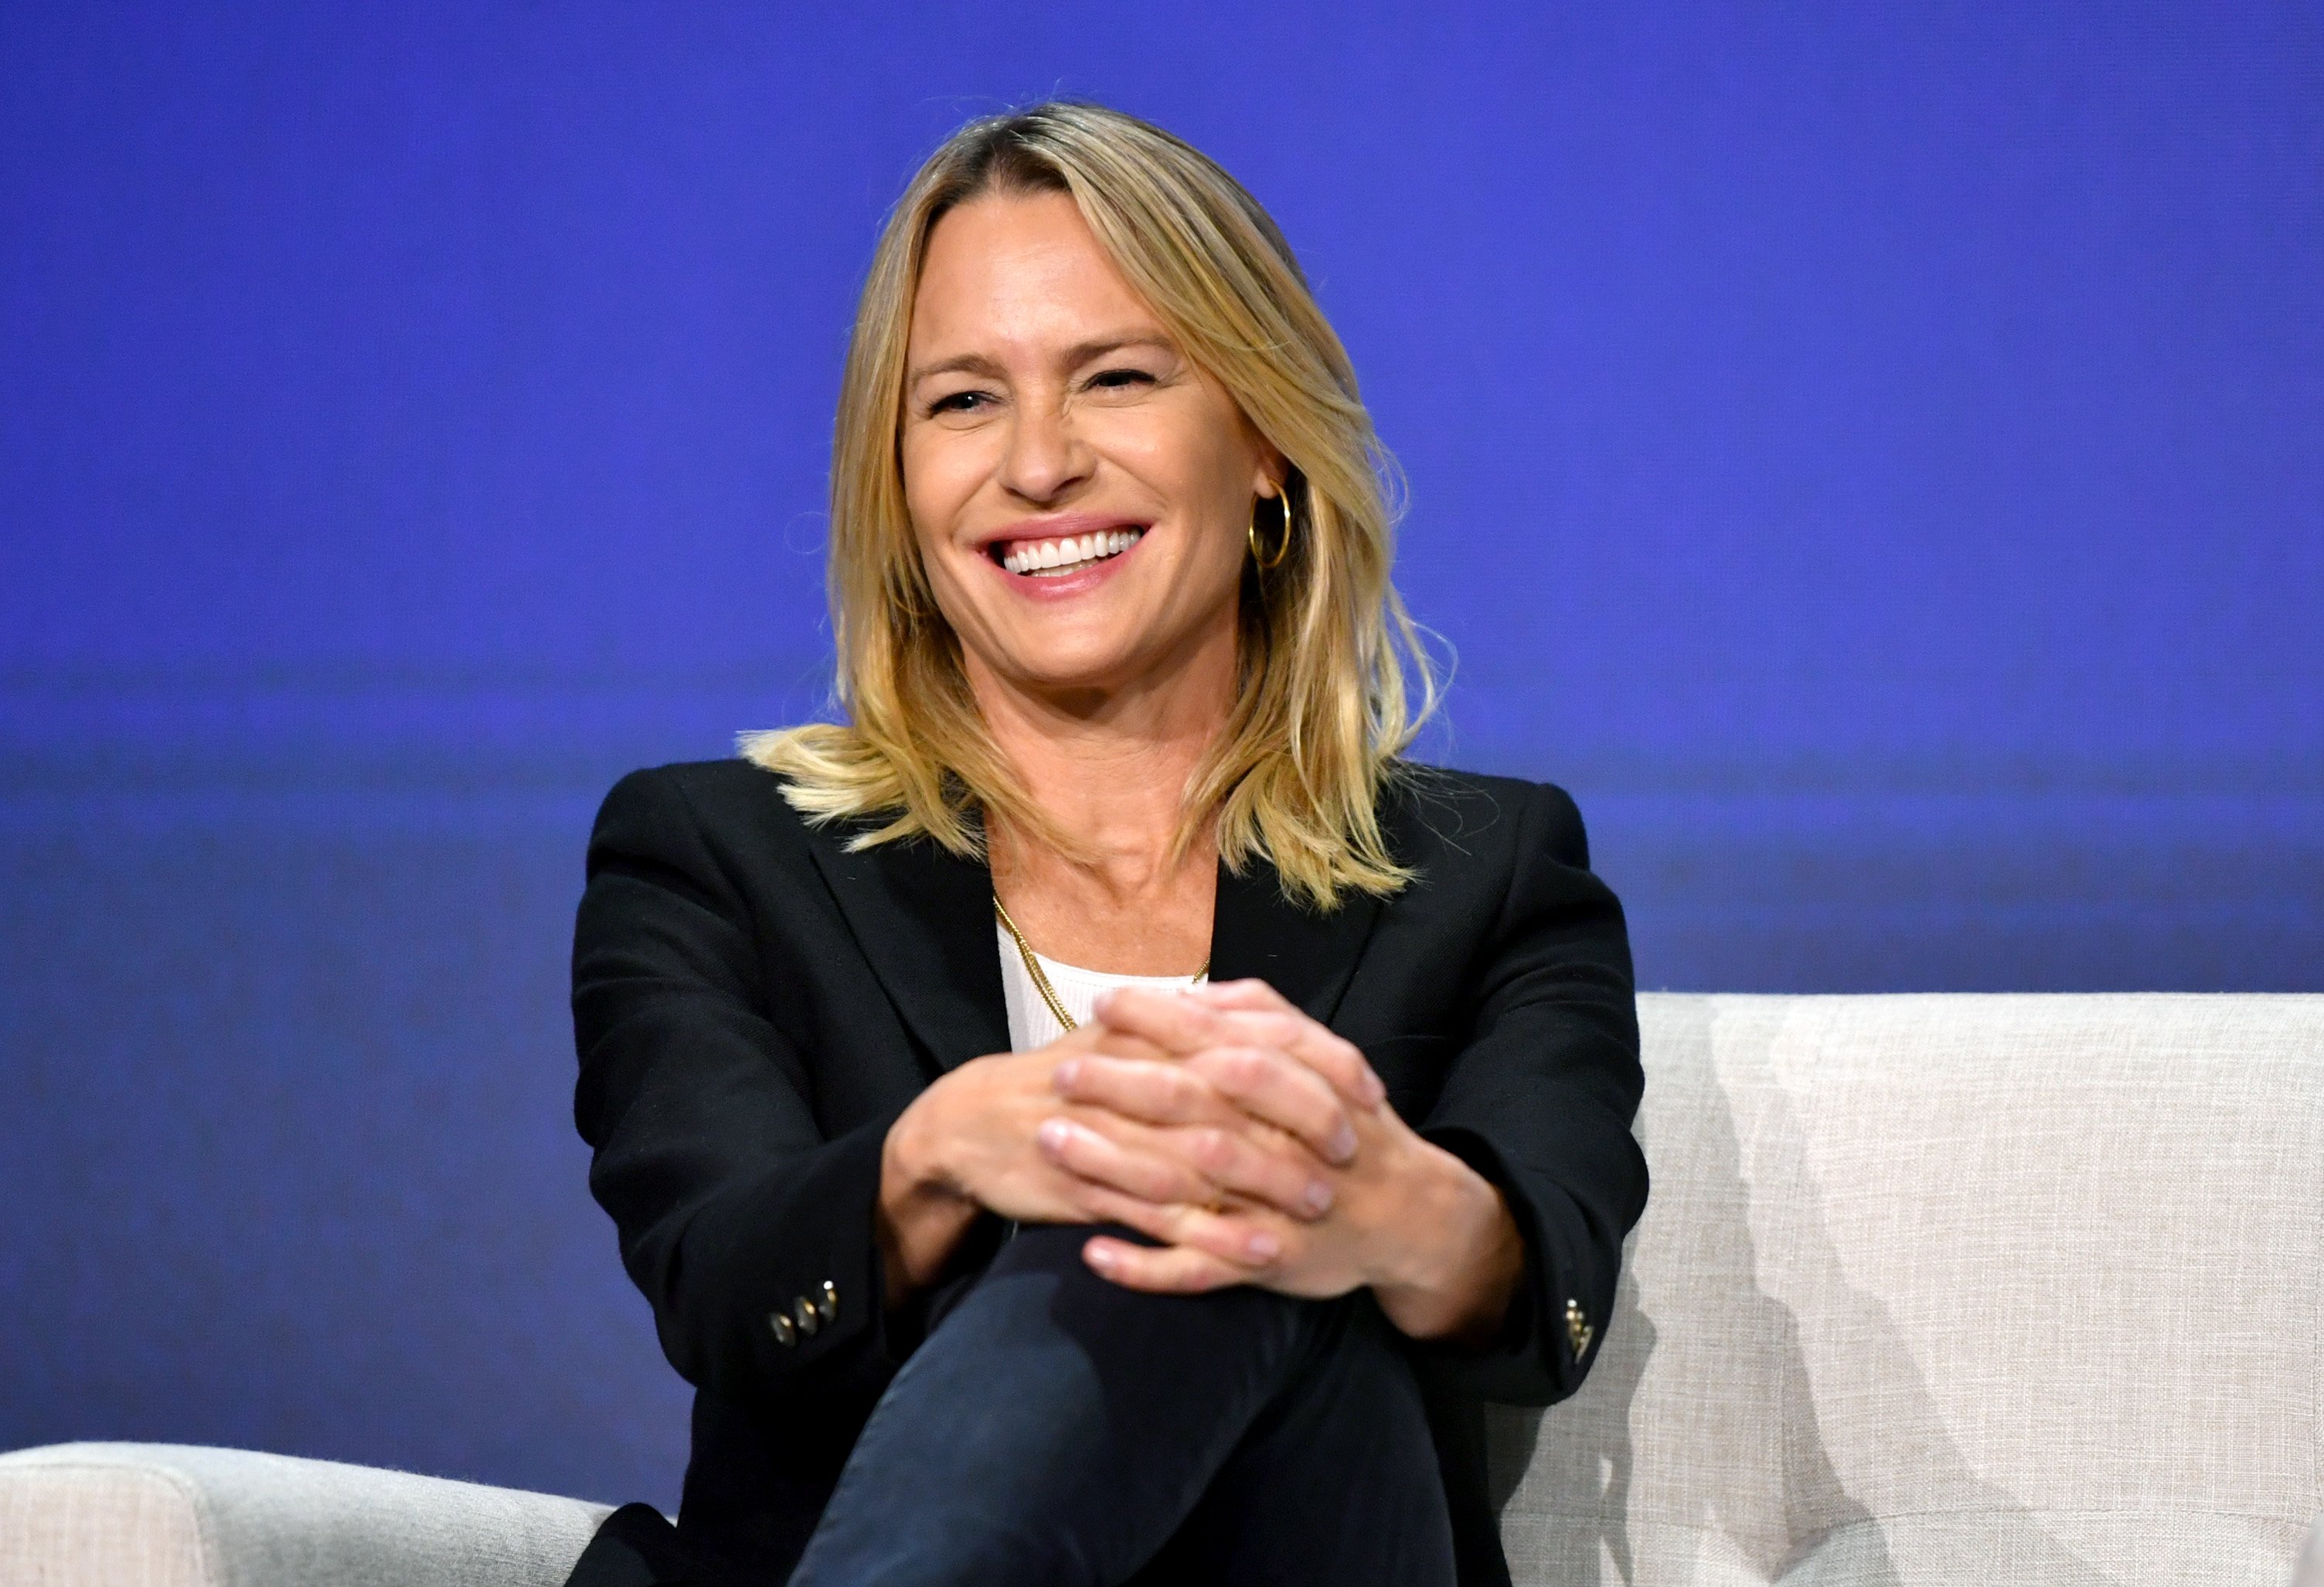 Robin Wright speaks onstage at the Netflix "House of Cards" FYSEE Event on June 4, 2019 in Los Angeles, California. | Photo: Getty Images